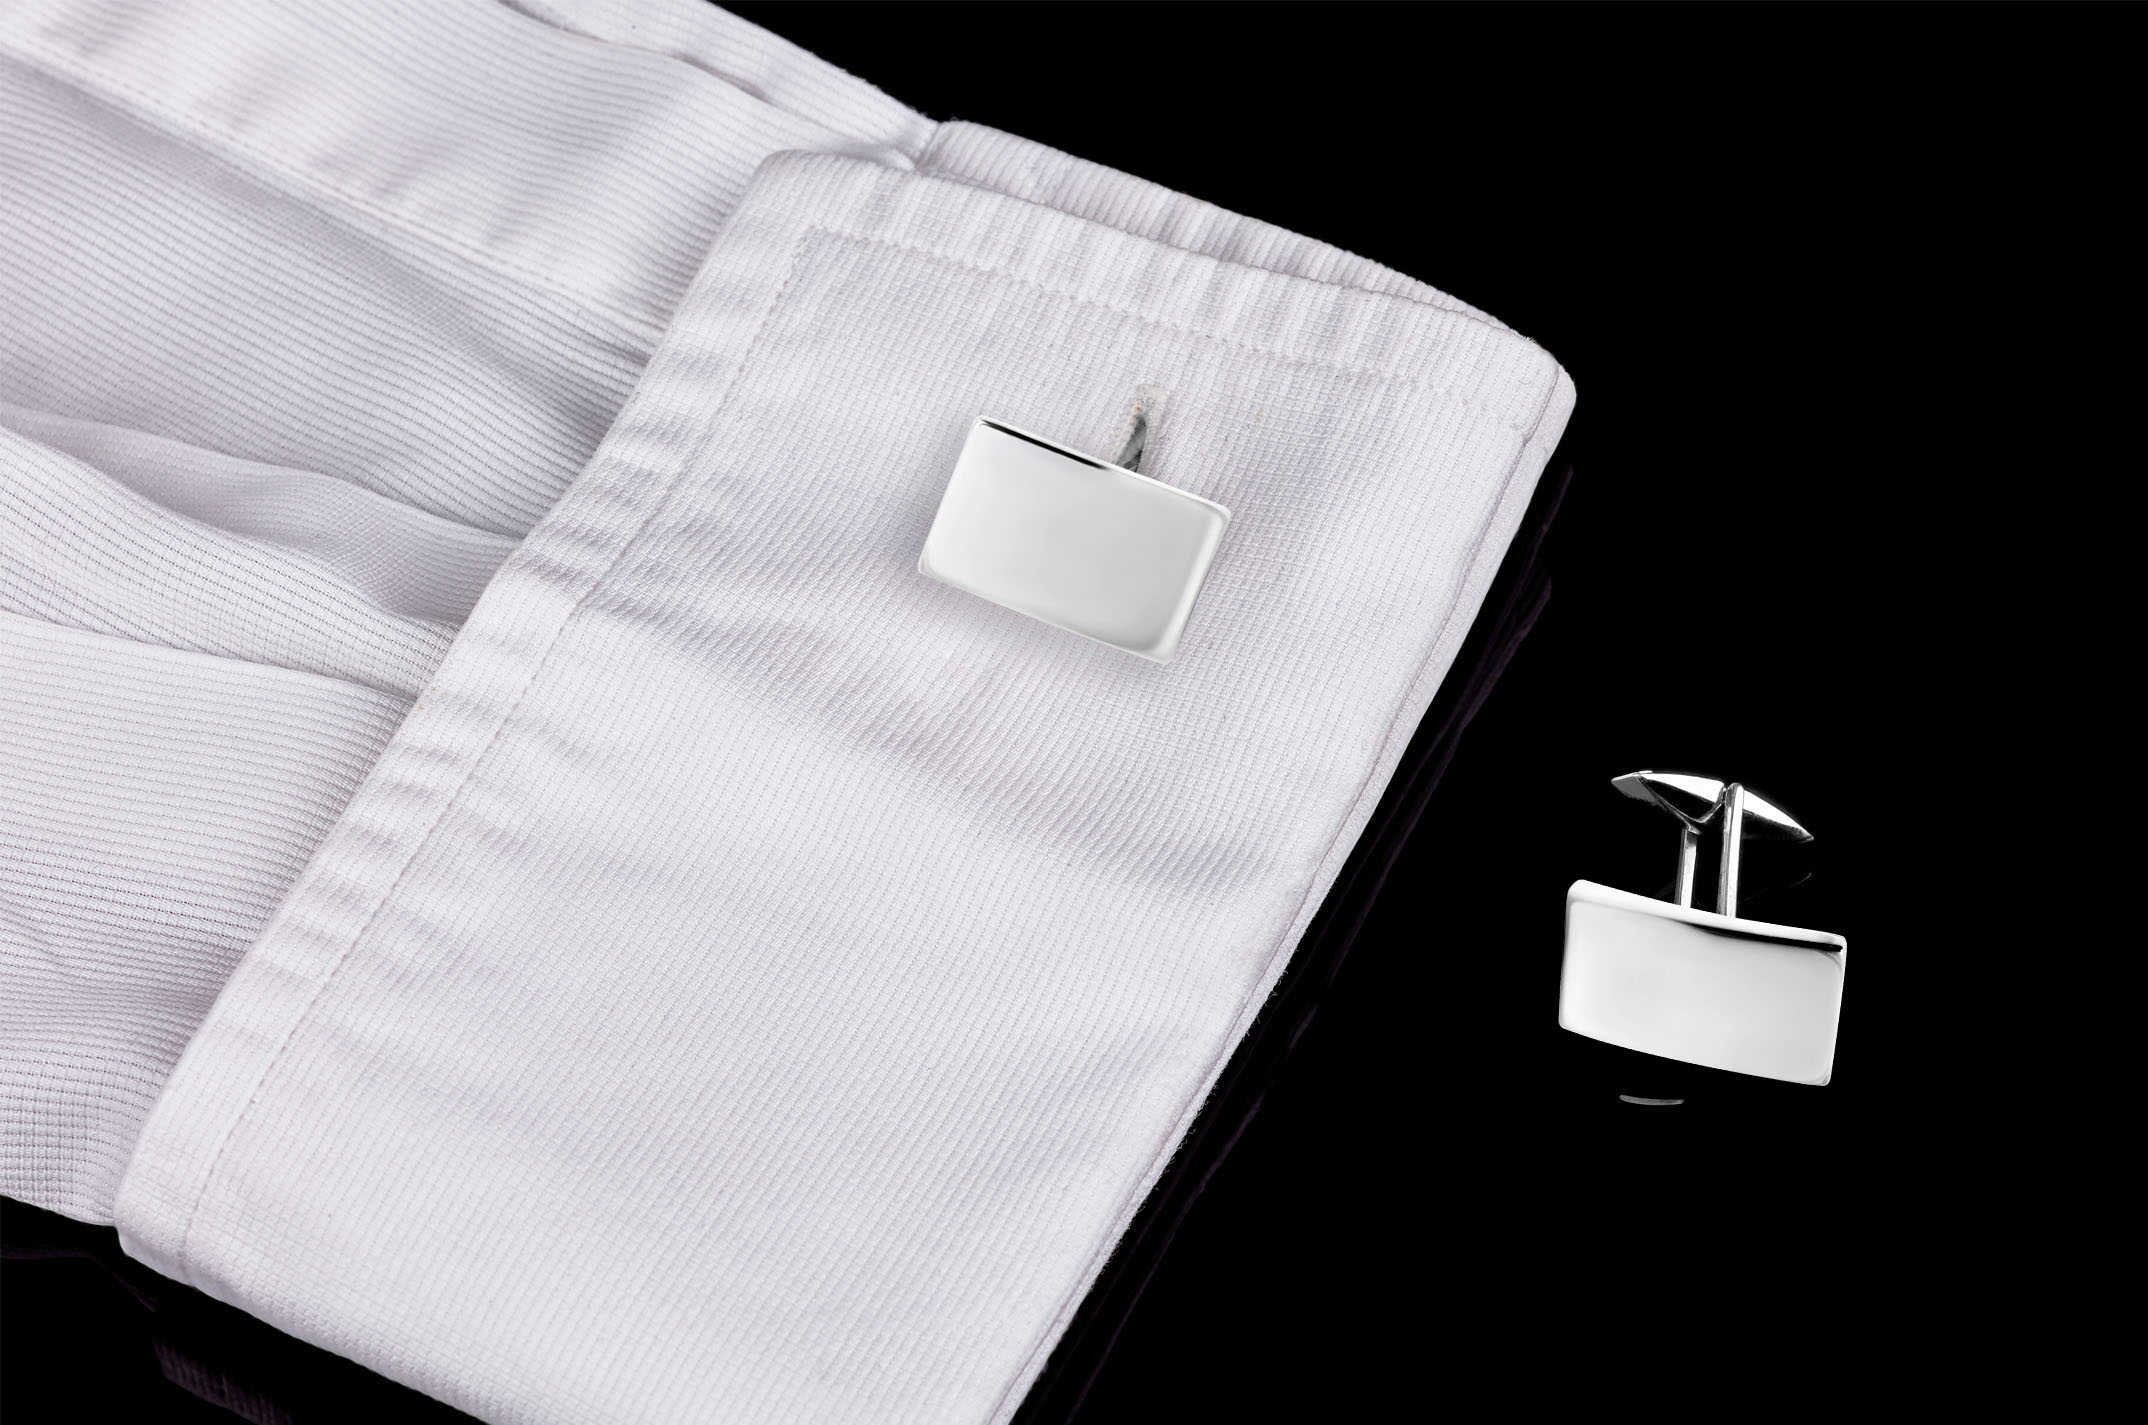 Jewel: cufflinks;Material: 925 silver;Weight: 8.5 gr;Color: white;Size: 1.6 cm x 1 cm;Gender: man